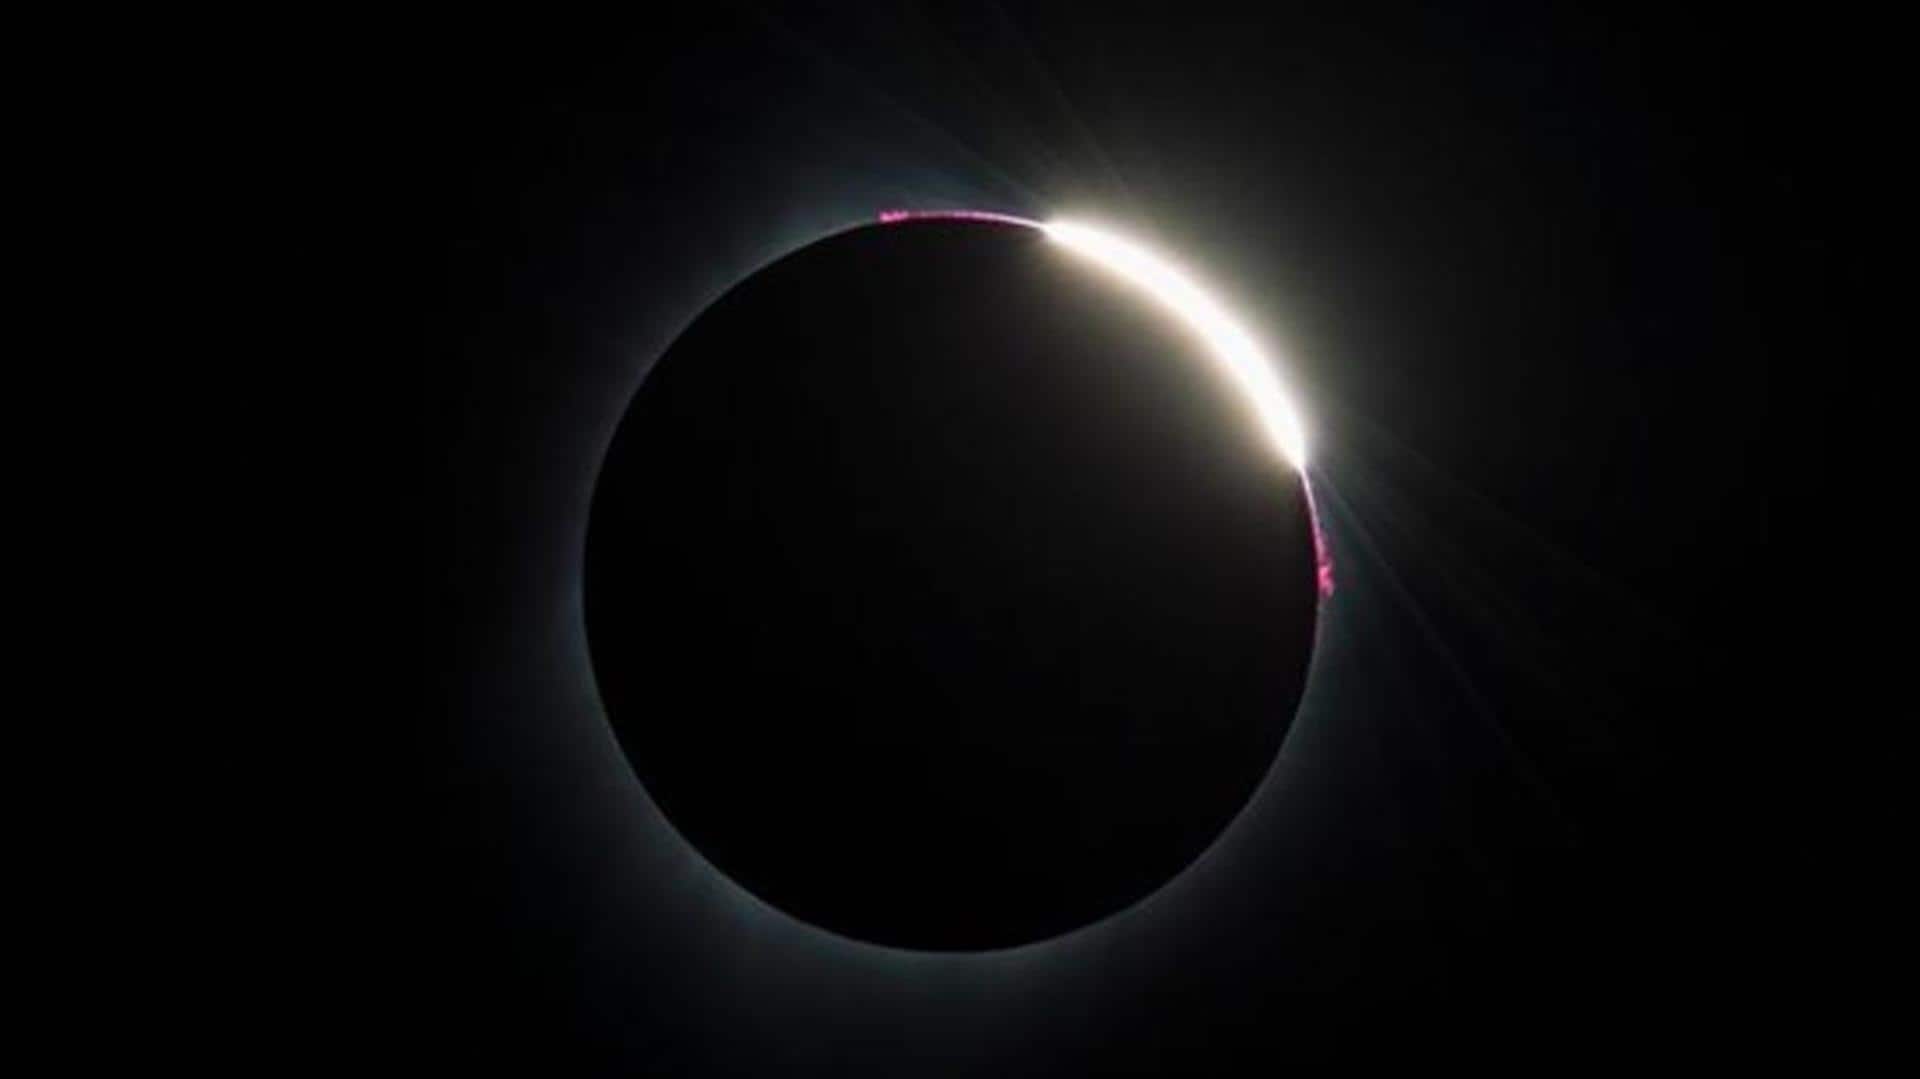 Hybrid solar eclipse on April 20 How to watch